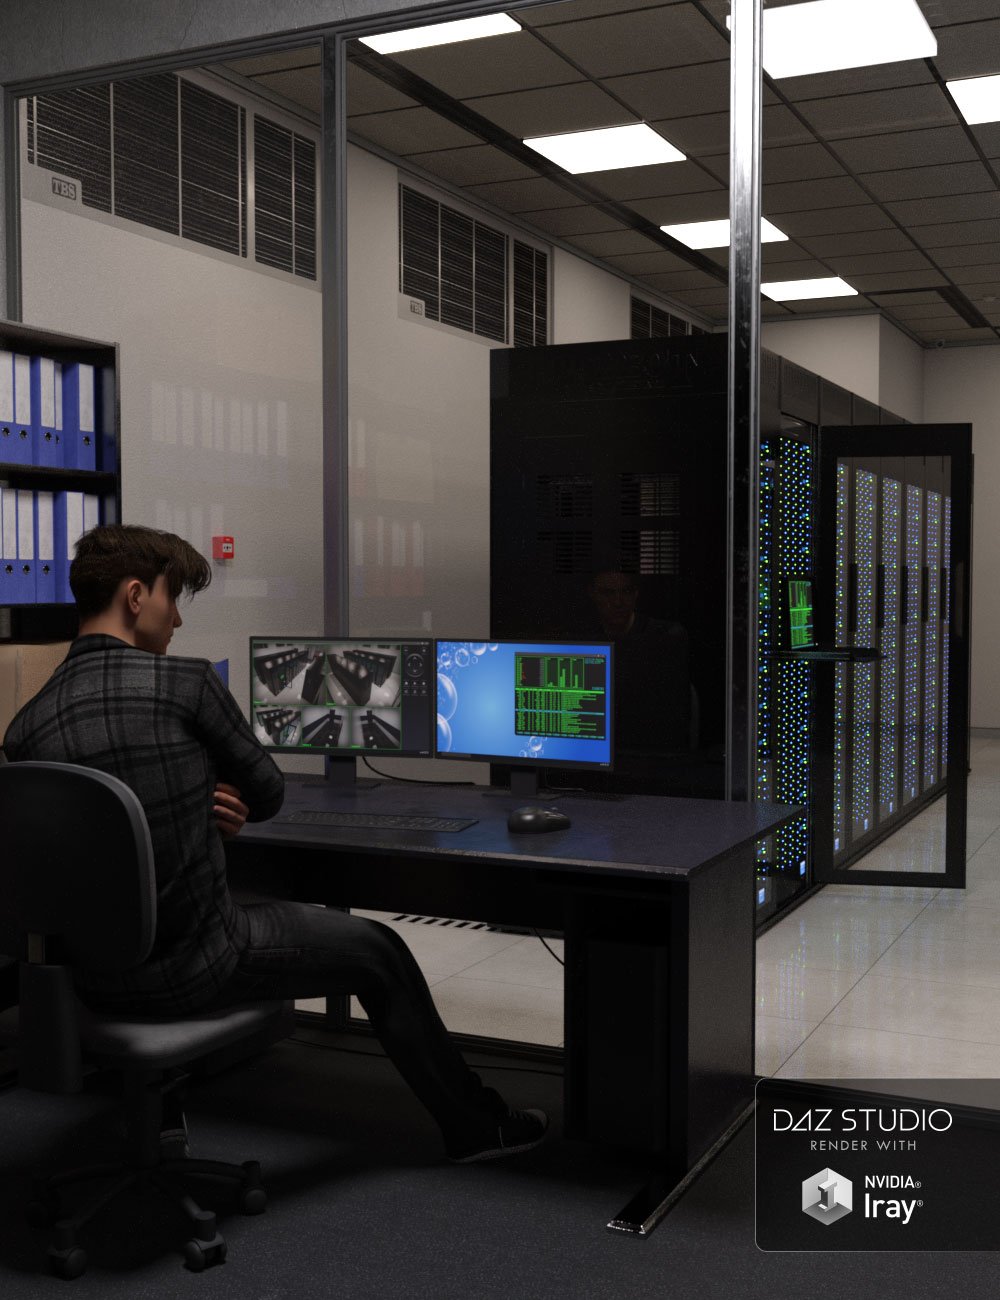 Server Room and Administrator Office | Daz